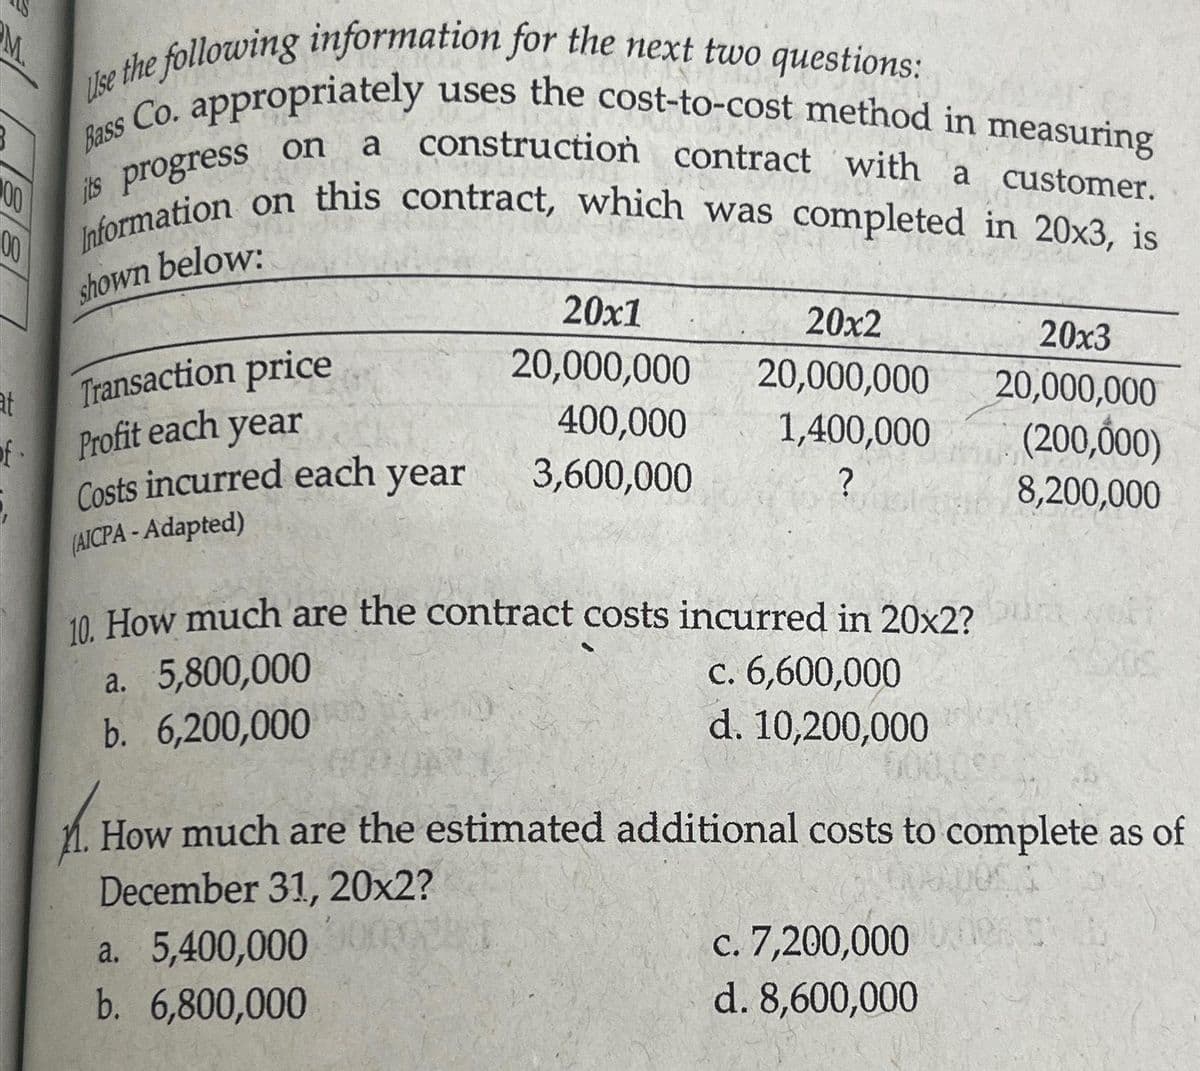 M.
00
00
at
f.
Use the following information for the next two questions:
Co. appropriately
uses the cost-to-cost method in measuring
construction contract with a customer.
Information on this contract, which was completed in 20x3, is
shown below:
Bass
its progress on
a
Transaction price
Profit each year
Costs incurred each year
(AICPA -Adapted)
20x1
20,000,000
400,000
3,600,000
a. 5,400,000
b. 6,800,000
20x2
20,000,000
1,400,000
?
10. How much are the contract costs incurred in 20x2?
a. 5,800,000
c. 6,600,000
b. 6,200,000
d. 10,200,000
How much are the estimated additional costs to complete as of
December 31, 20x2?
20x3
20,000,000
(200,000)
8,200,000
c. 7,200,000
d. 8,600,000